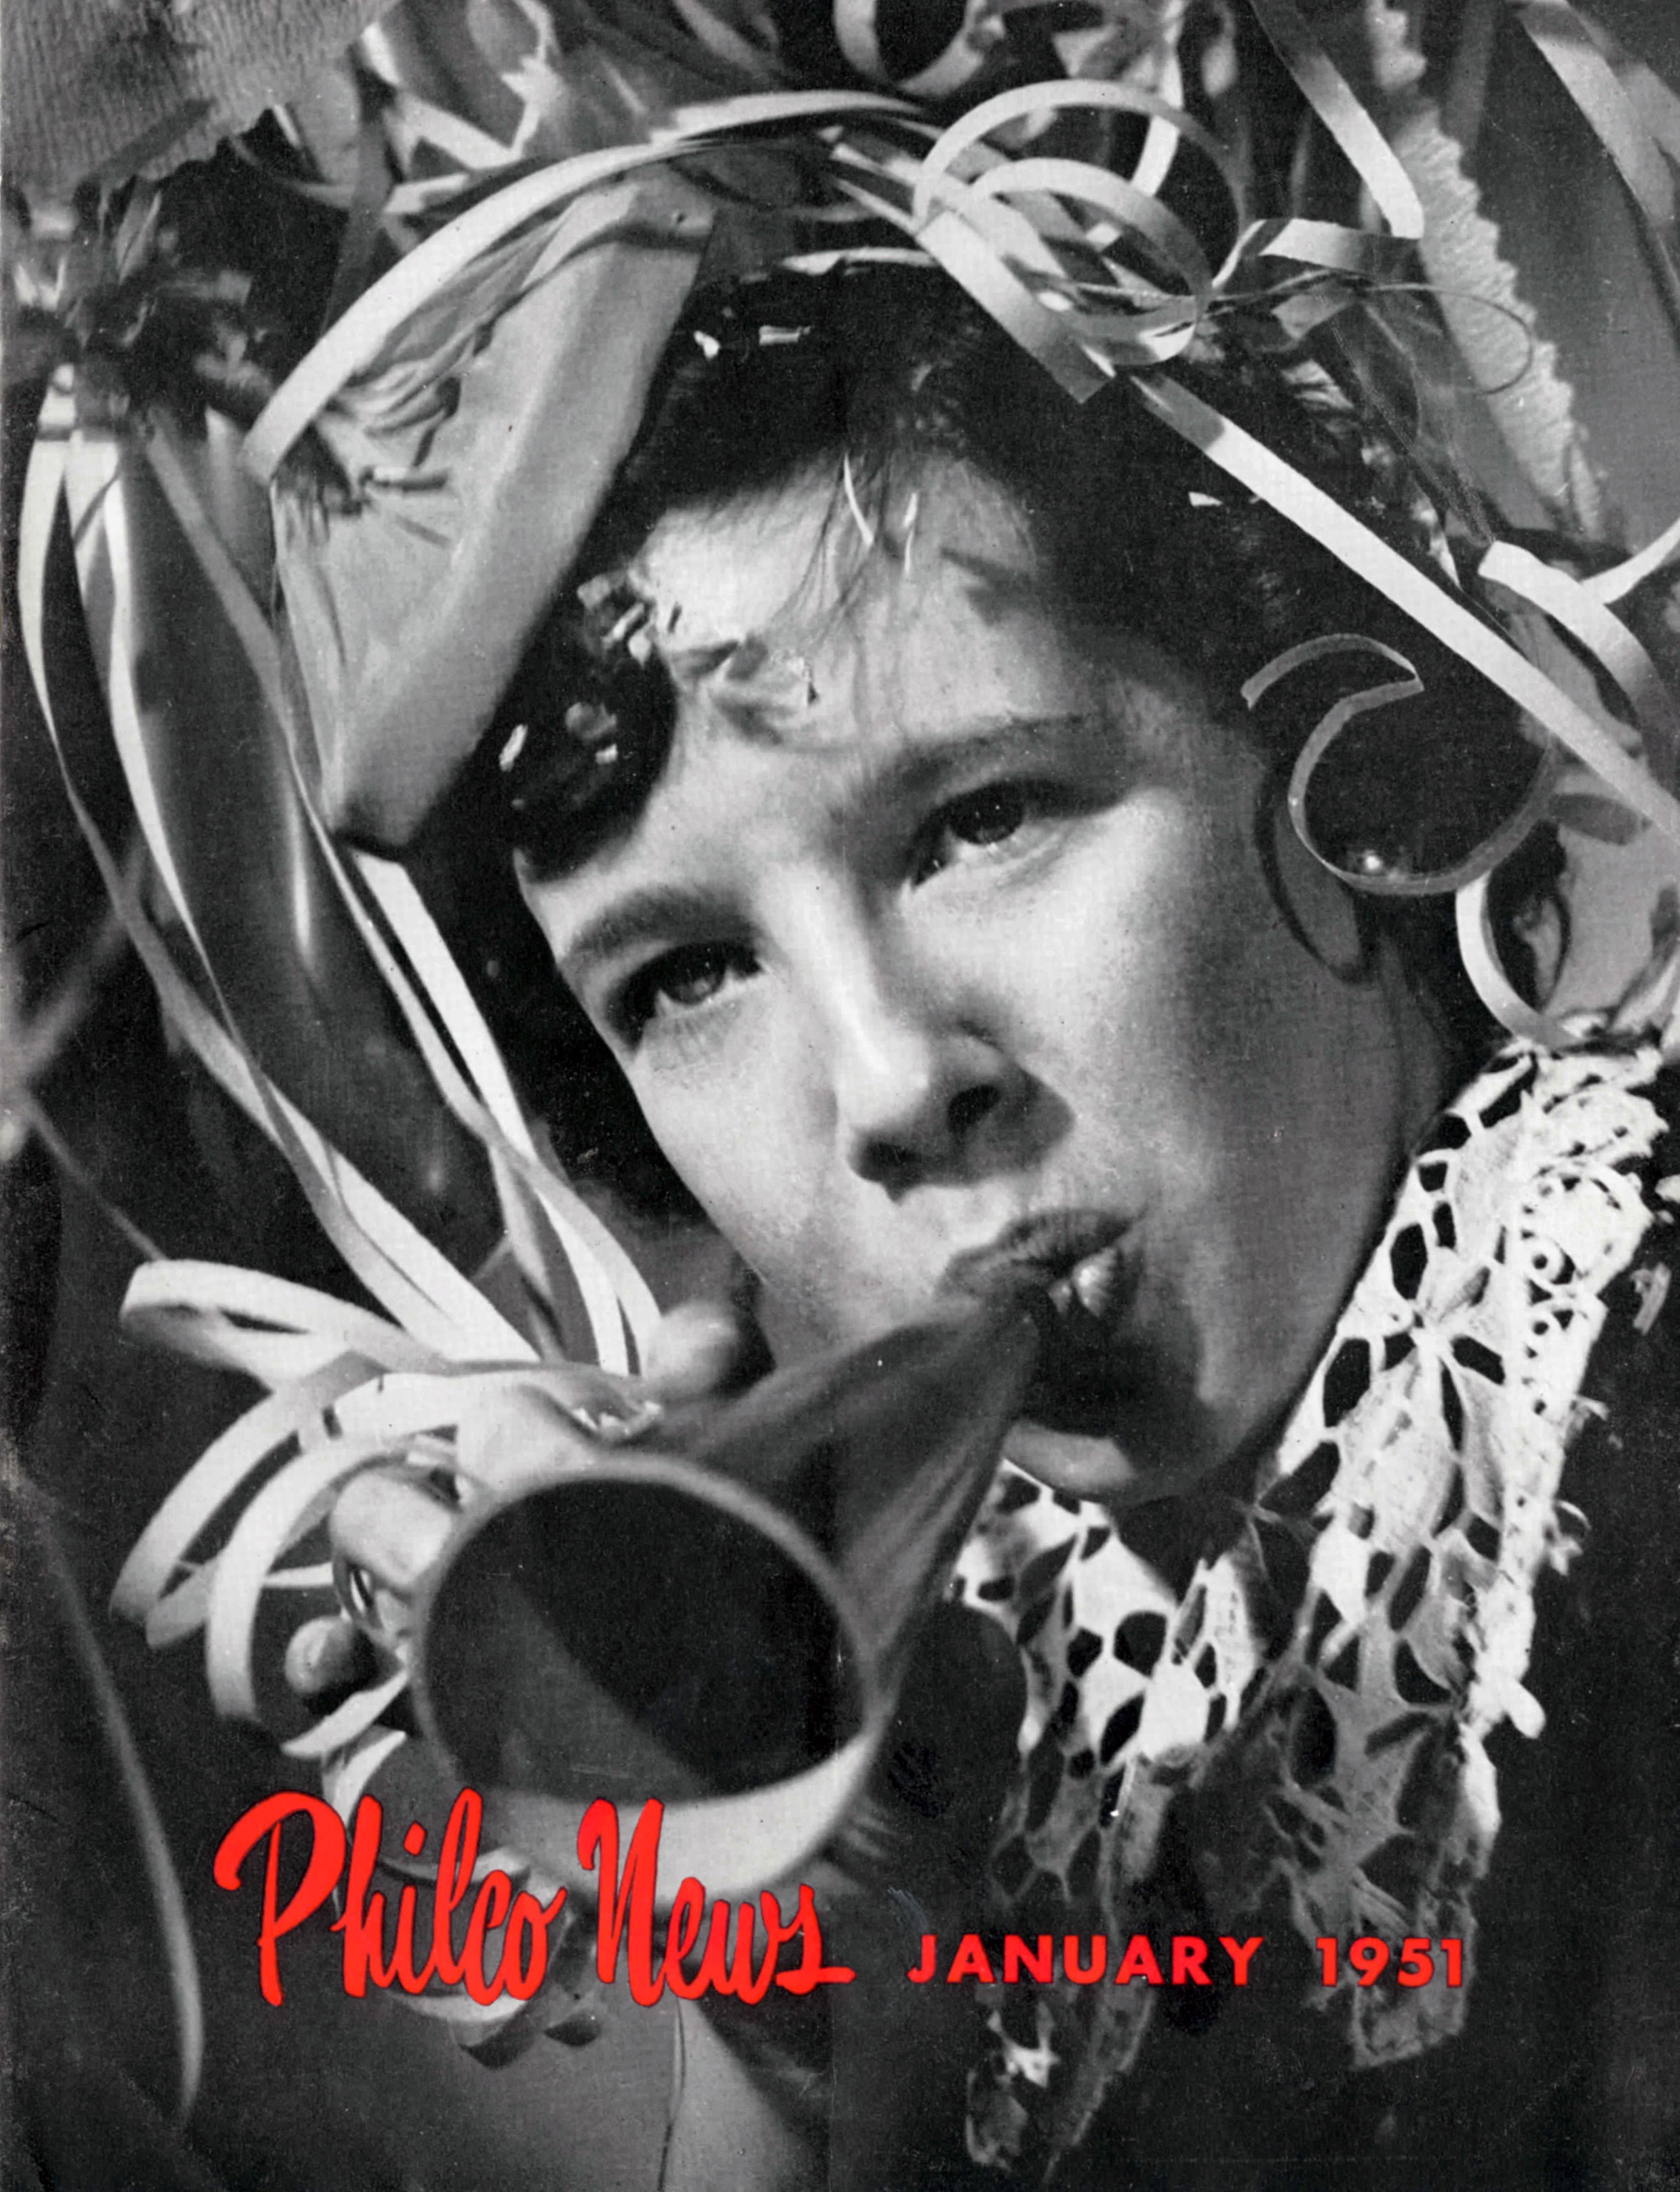 Cover of Philco magazine, showing a black and white photograph of a woman blowing into a noisemaker.